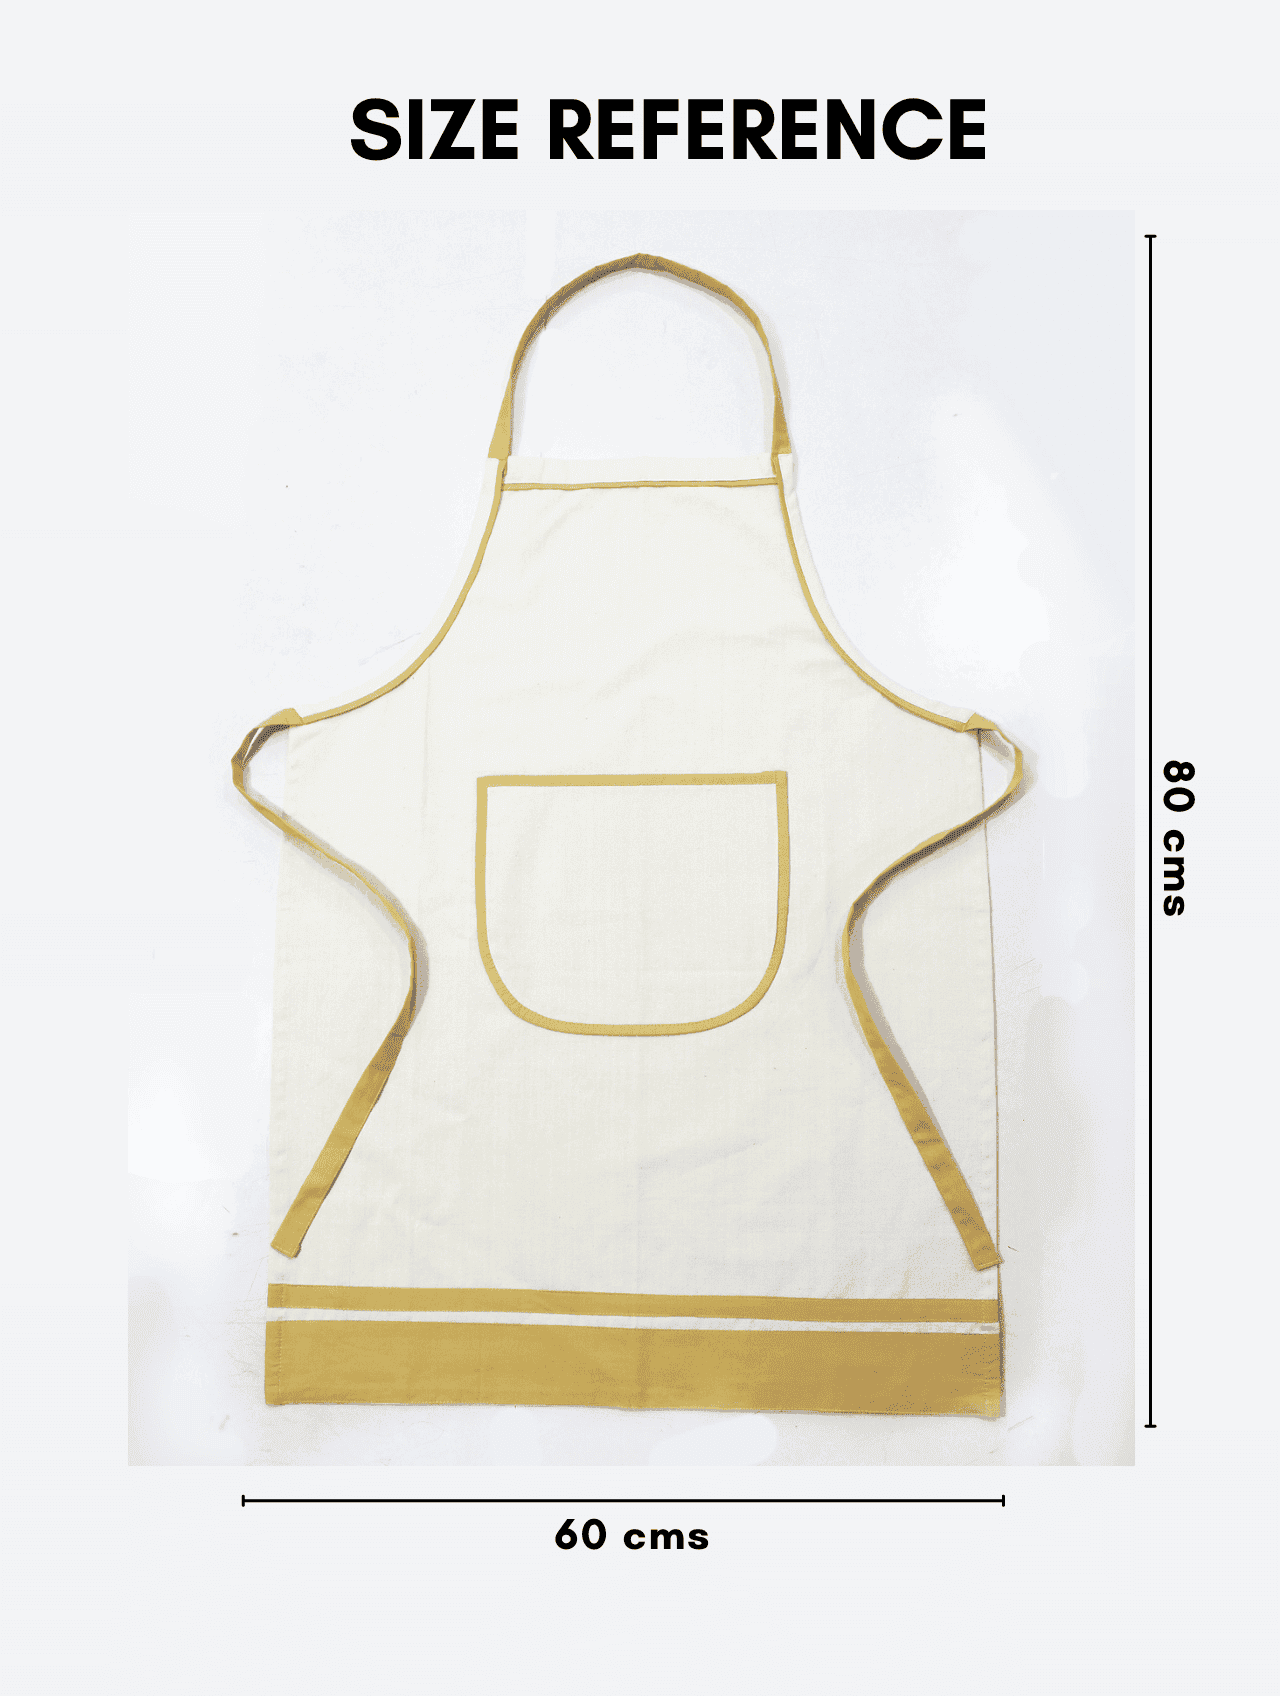 Stylish Natural Handwoven Cotton Kitchen Apron (1 Pc) Online In India